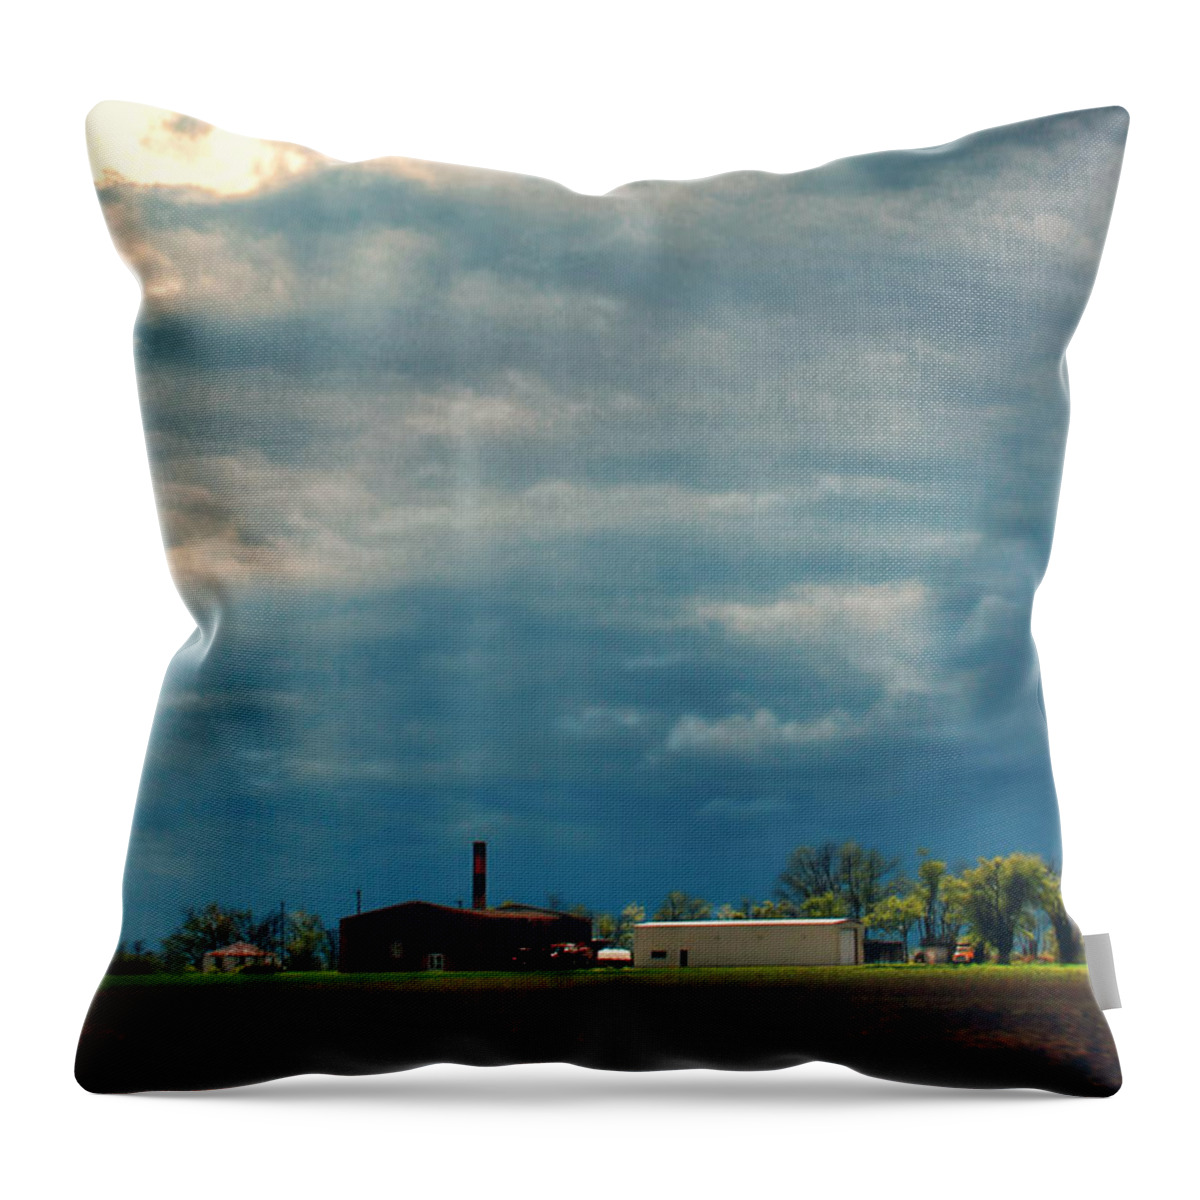 Clouds Throw Pillow featuring the photograph Showers of Blessings by Bonnie Willis